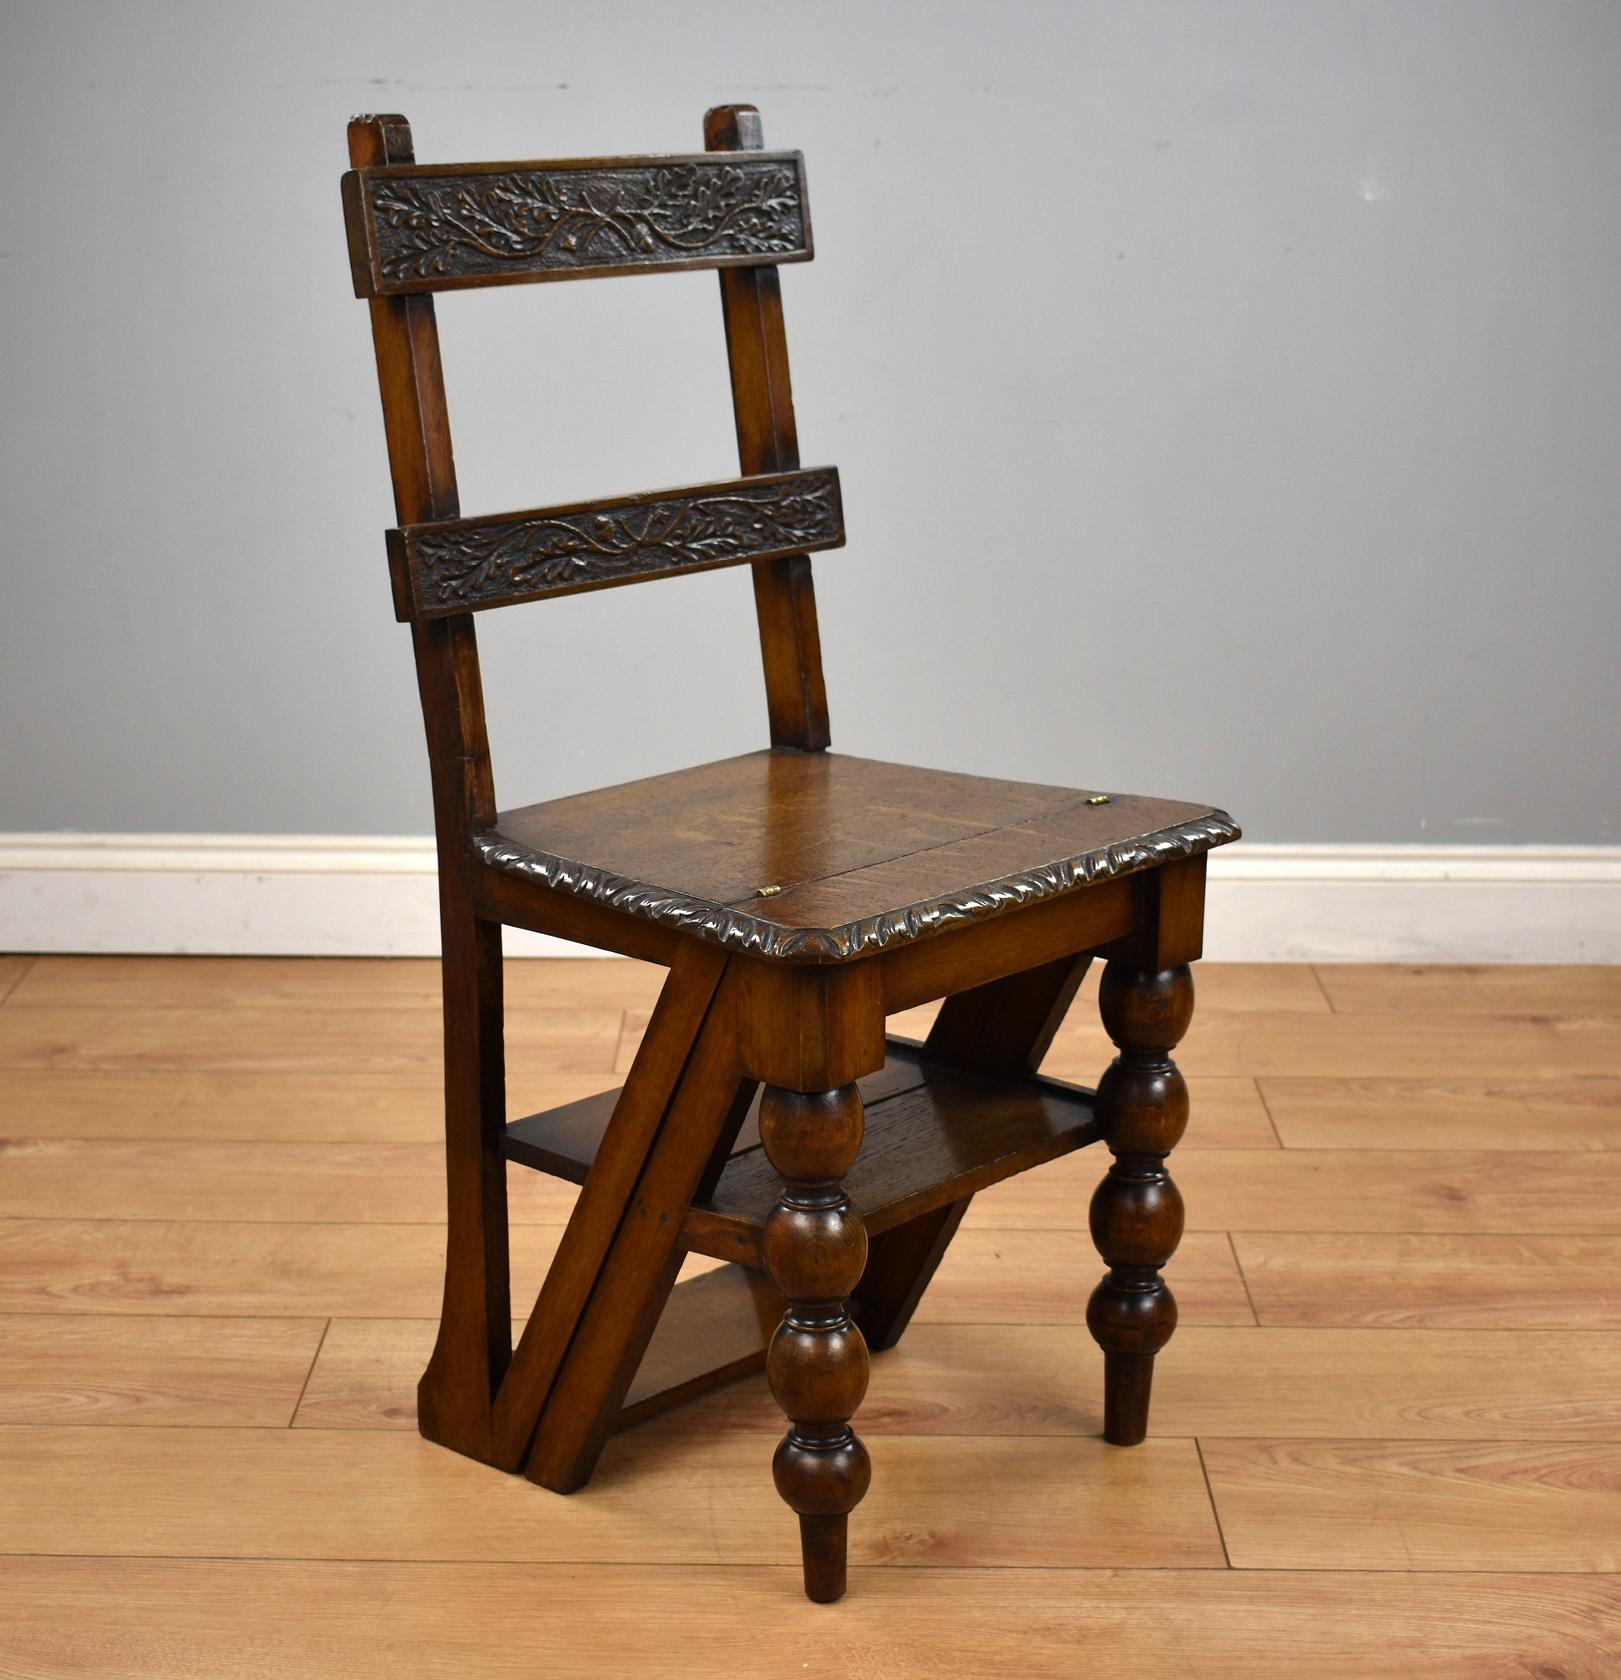 Pair 19th century chairs, one is metamorphic folding into library steps, both have nice carved back slats, with carved edge to the seats and have bobbin turned front legs.